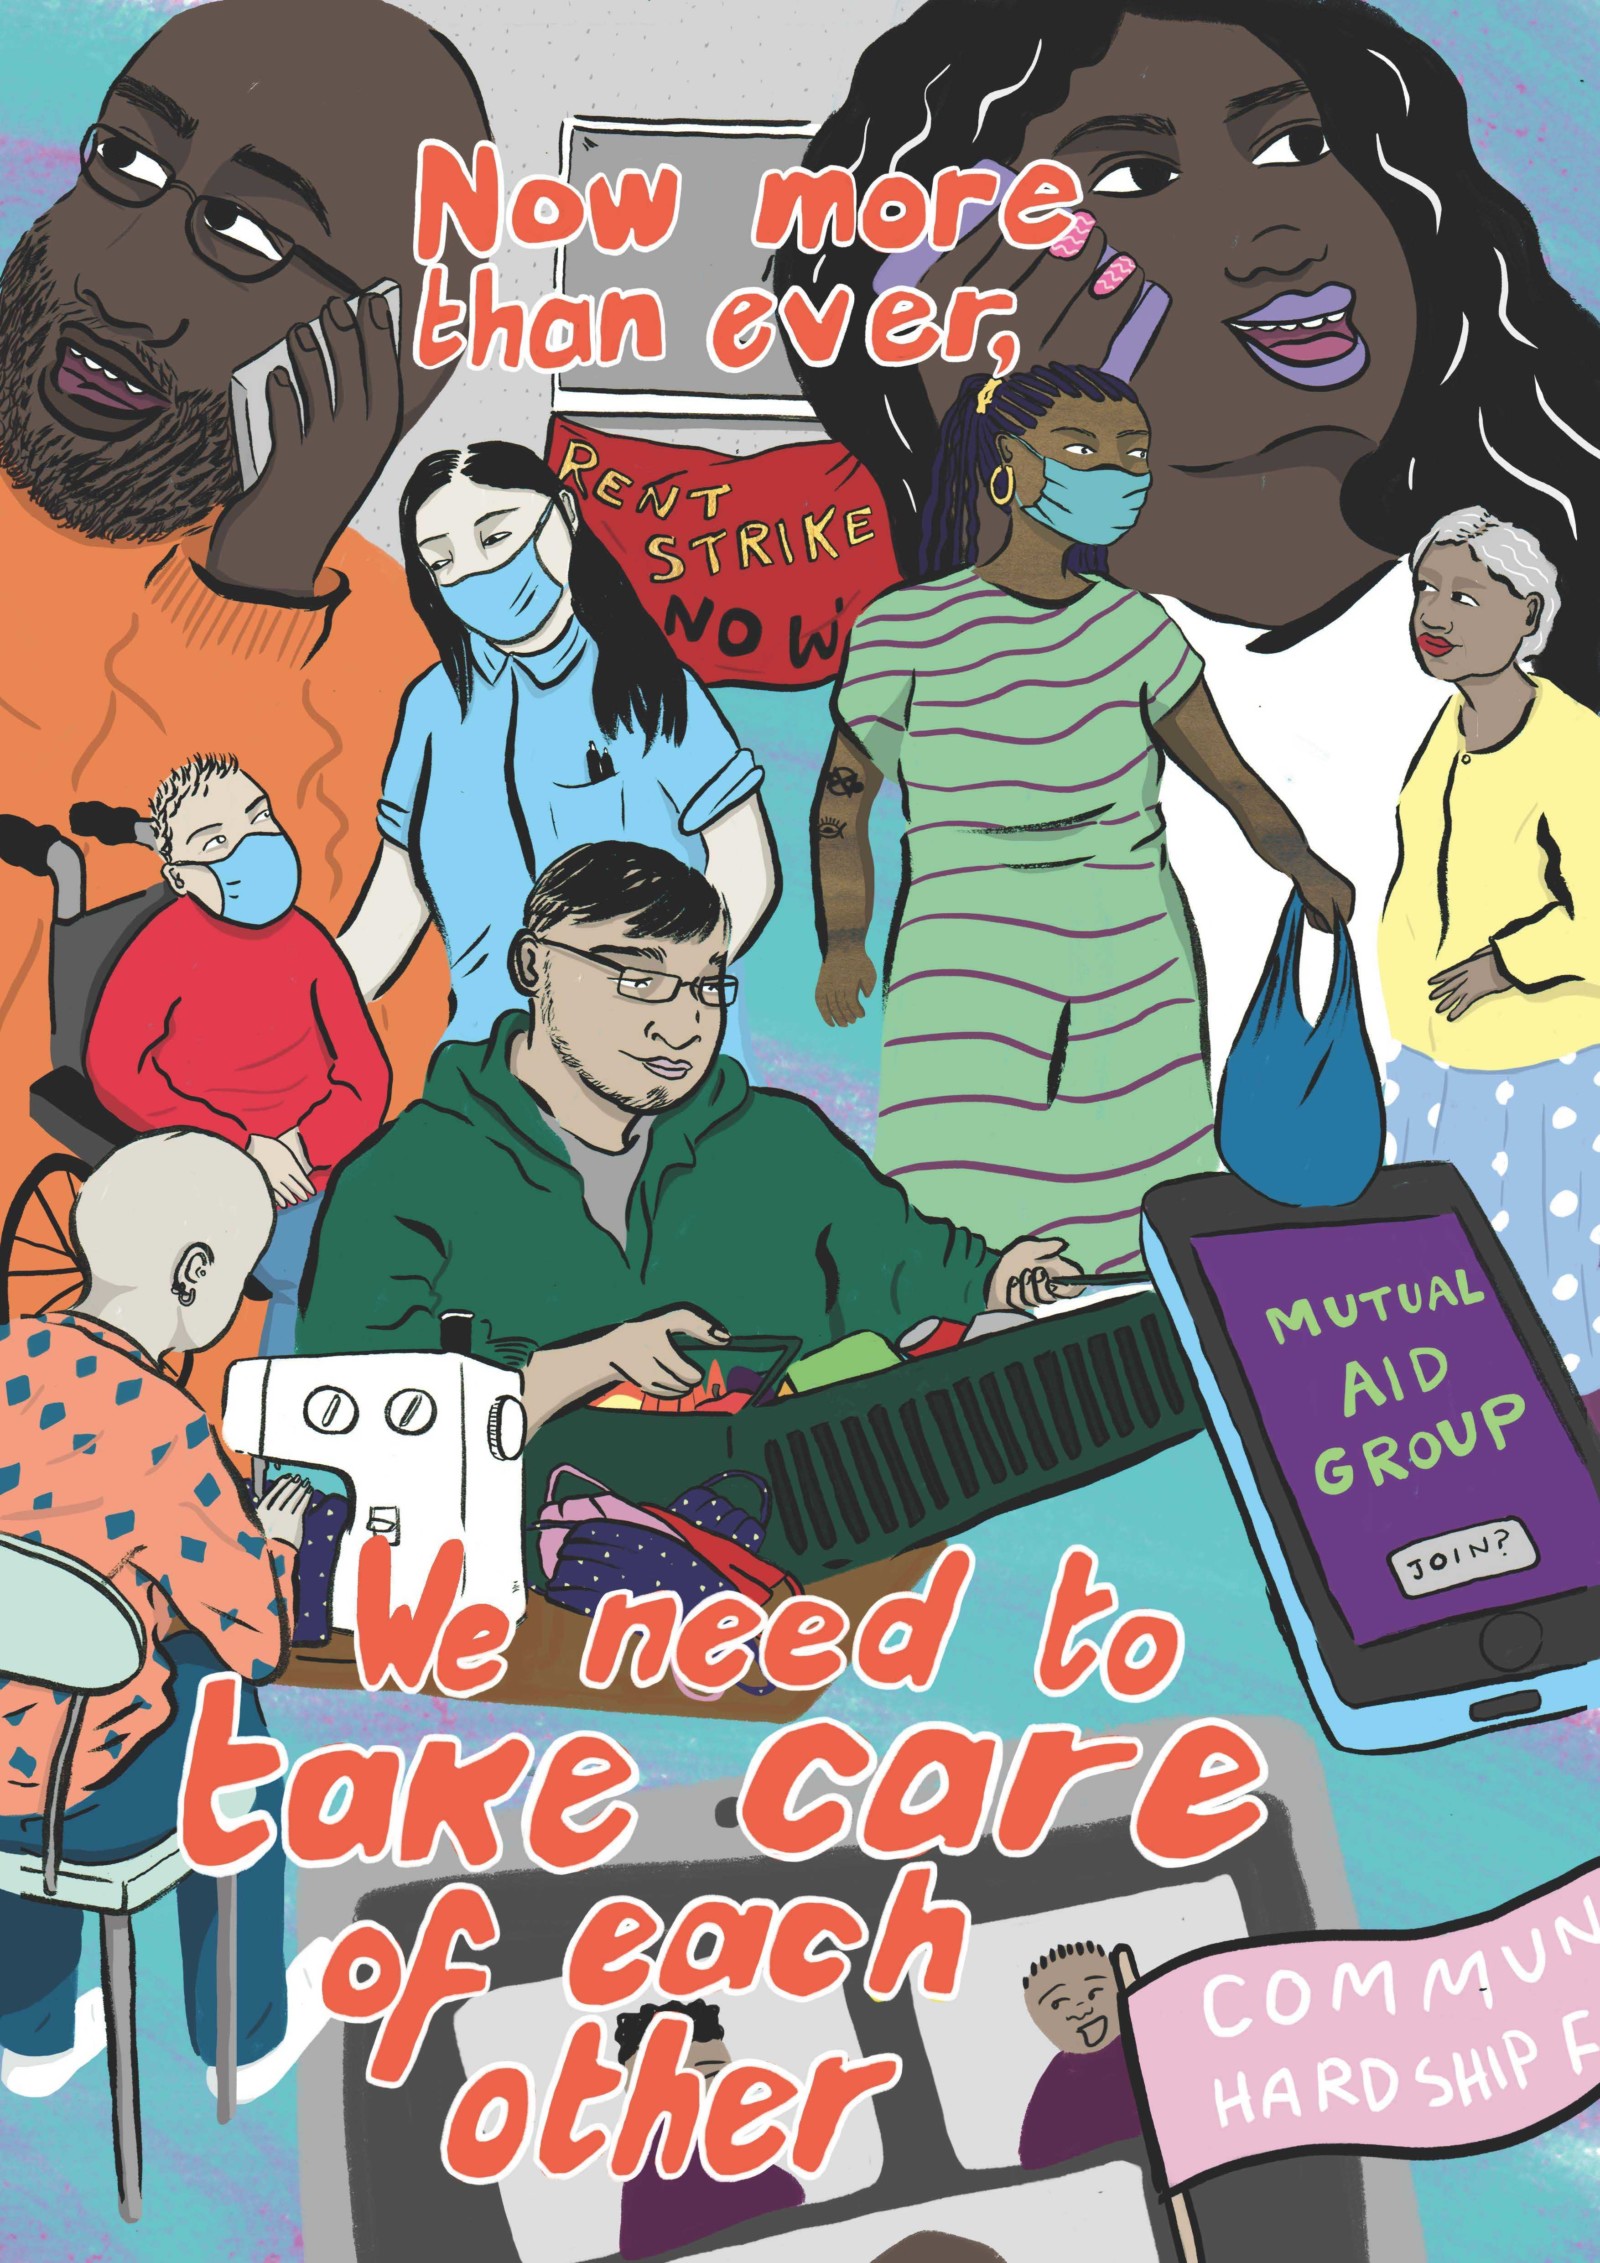 A painting with words that read 'Now more than ever, we need to take care of each other'. behind the text are paintings of people, 2 are taking a phone call, one is a nurse caring for a boy in a wheelchair, one is carrying groceries, one is delivering food, one is sat at a sewing machine. There is a phone screen that reads 'Mutual aid group', and a sign that reads 'Rent strike now'.